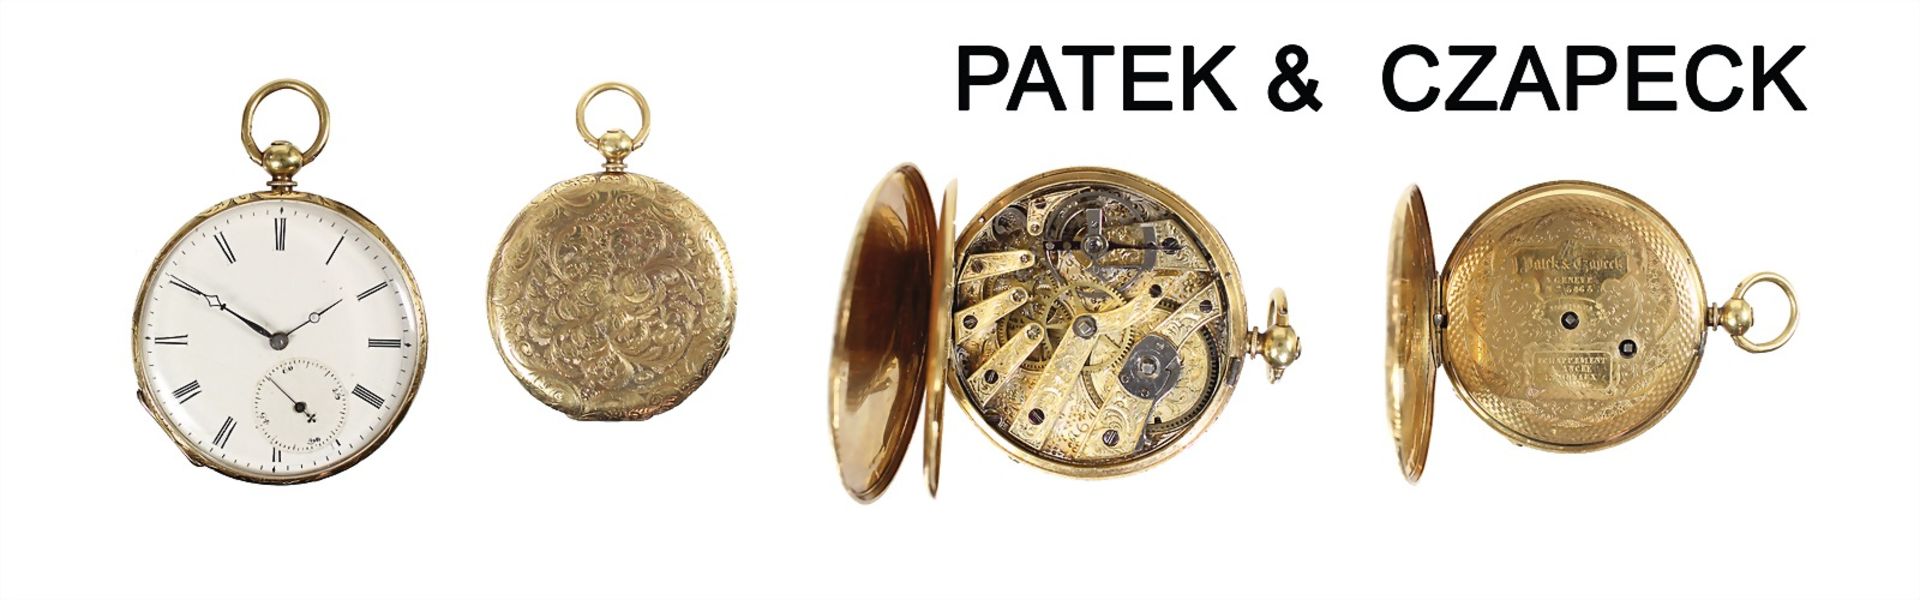 early rare fob watch with spring-cover, "PATEK & CZAPECK", Geneve before the 1850s ! yelow gold